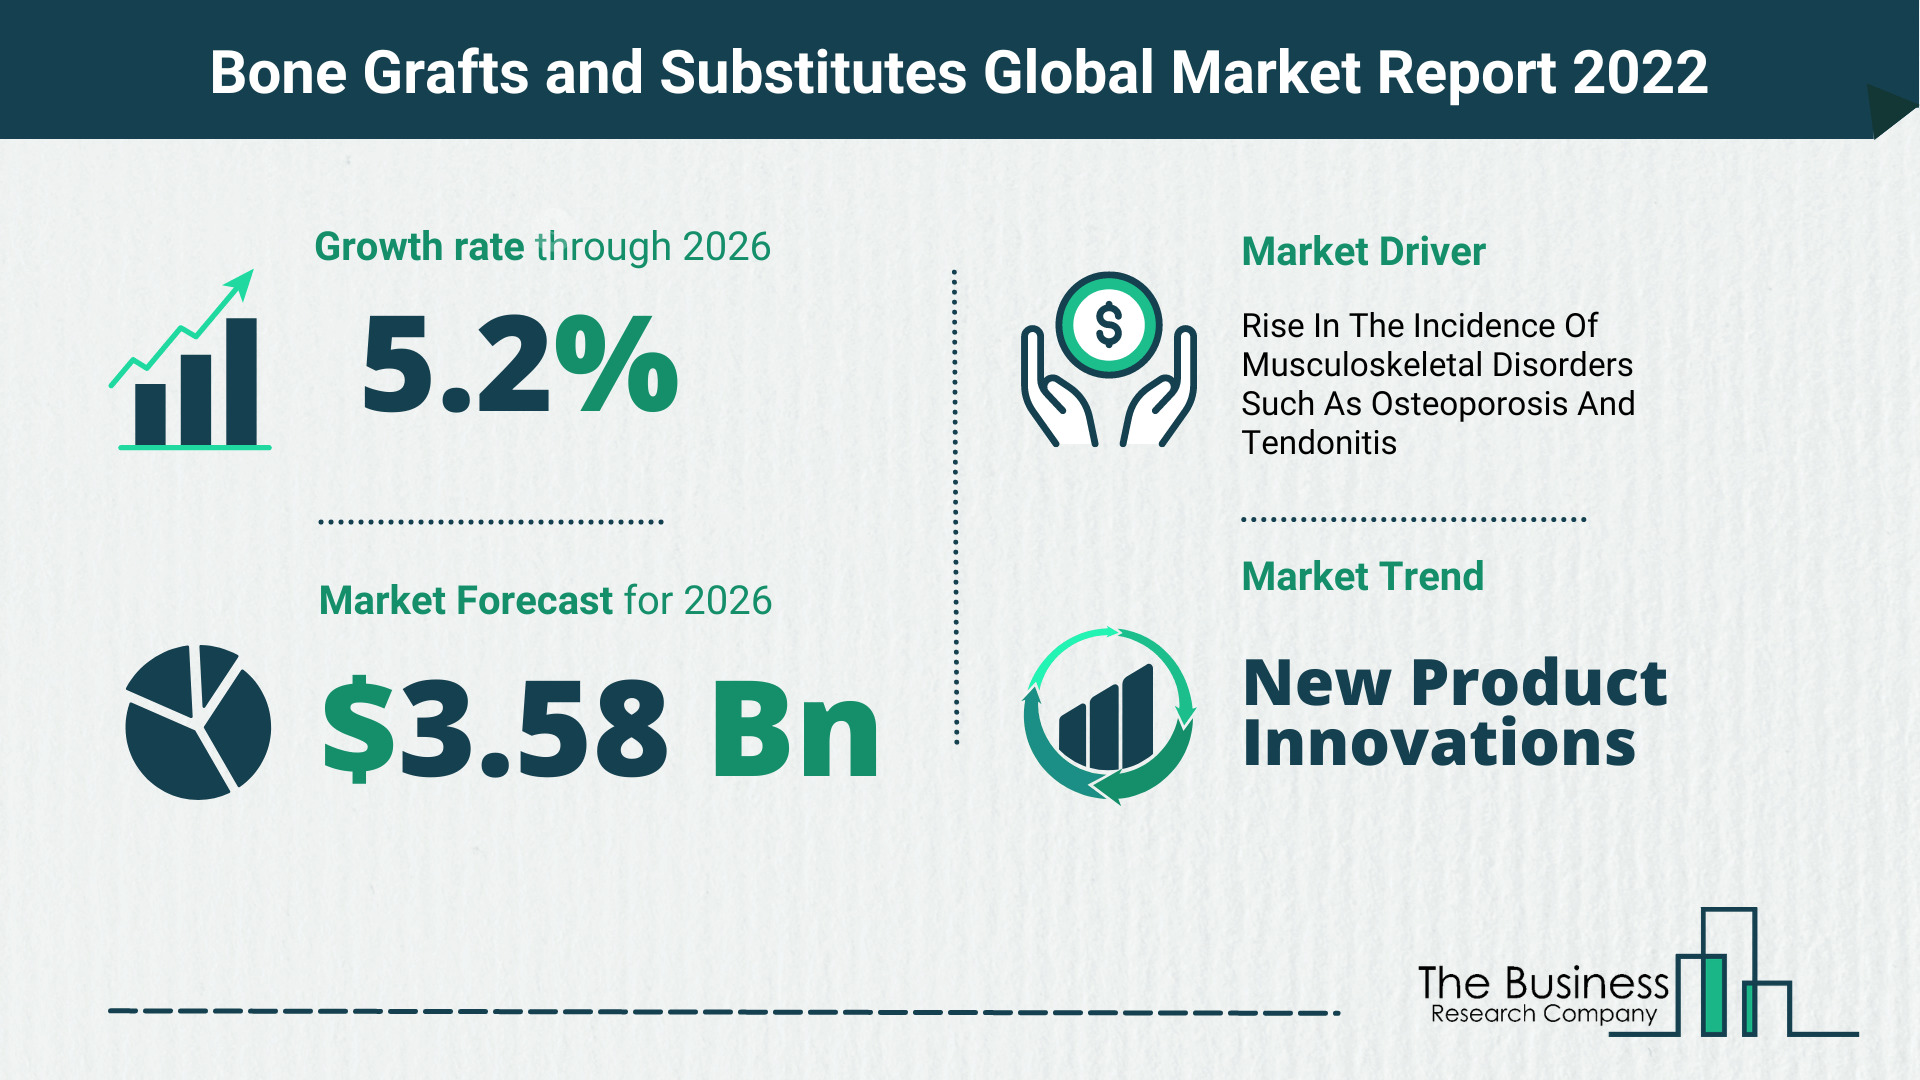 Global Bone Grafts and Substitutes Market